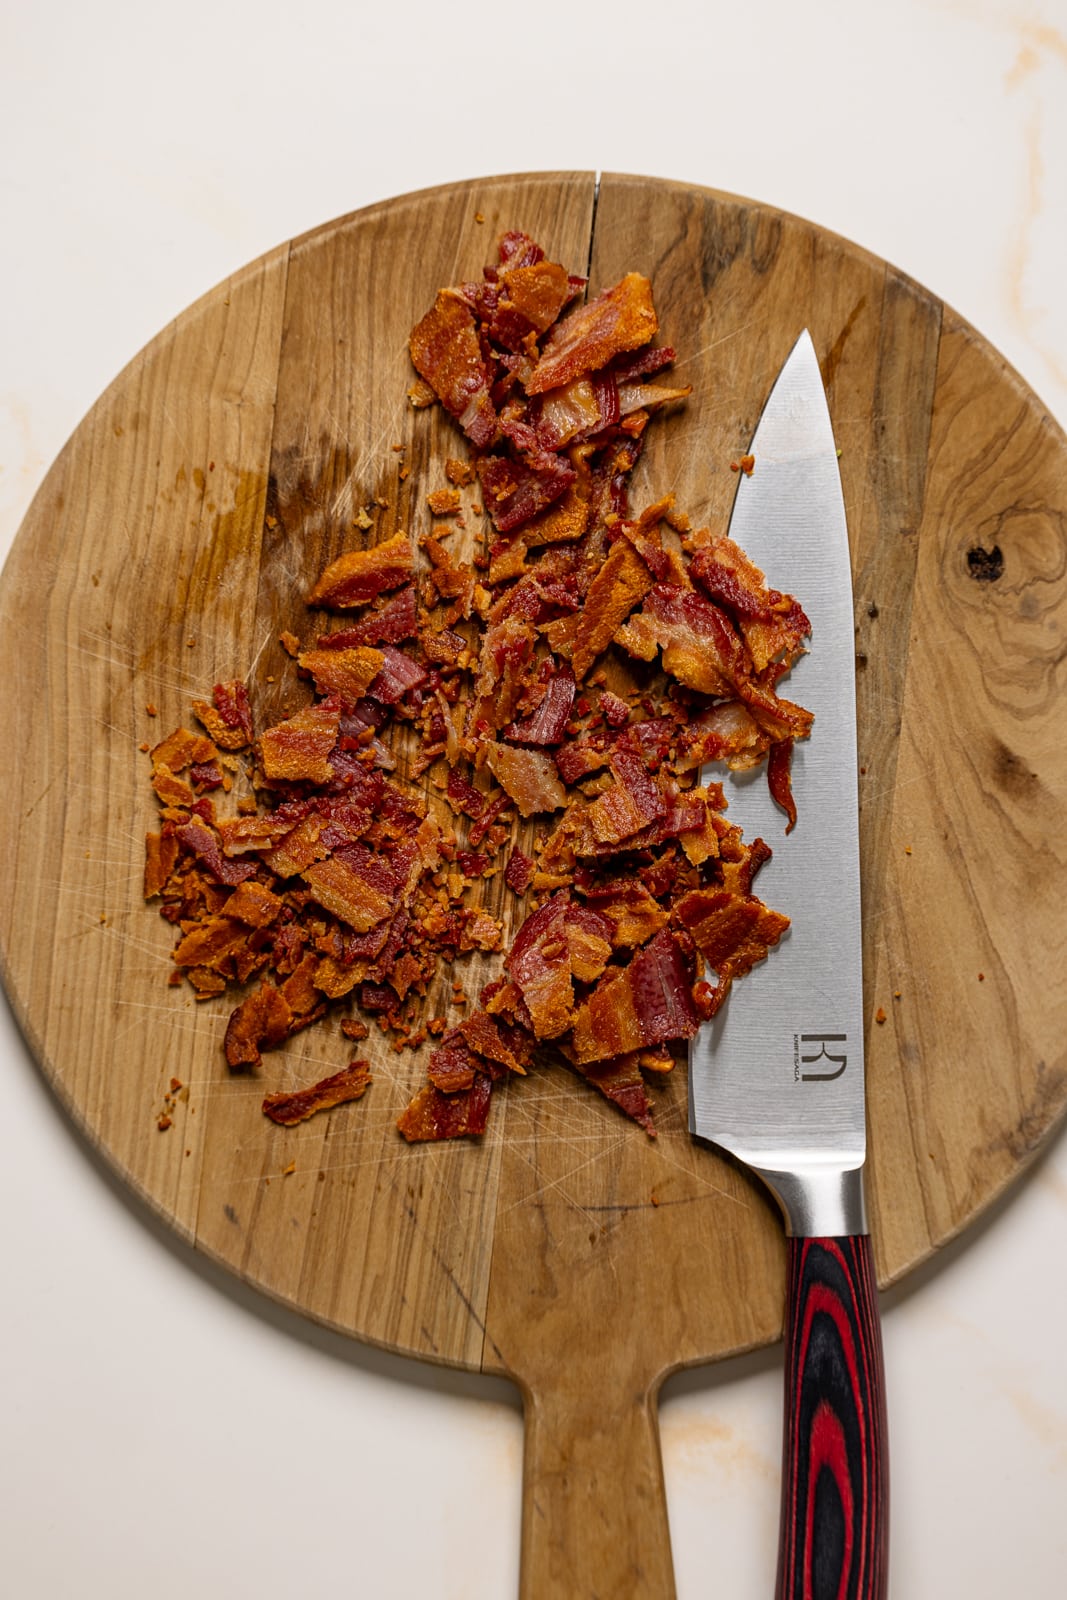 Chopped bacon on a cutting board with a knife.